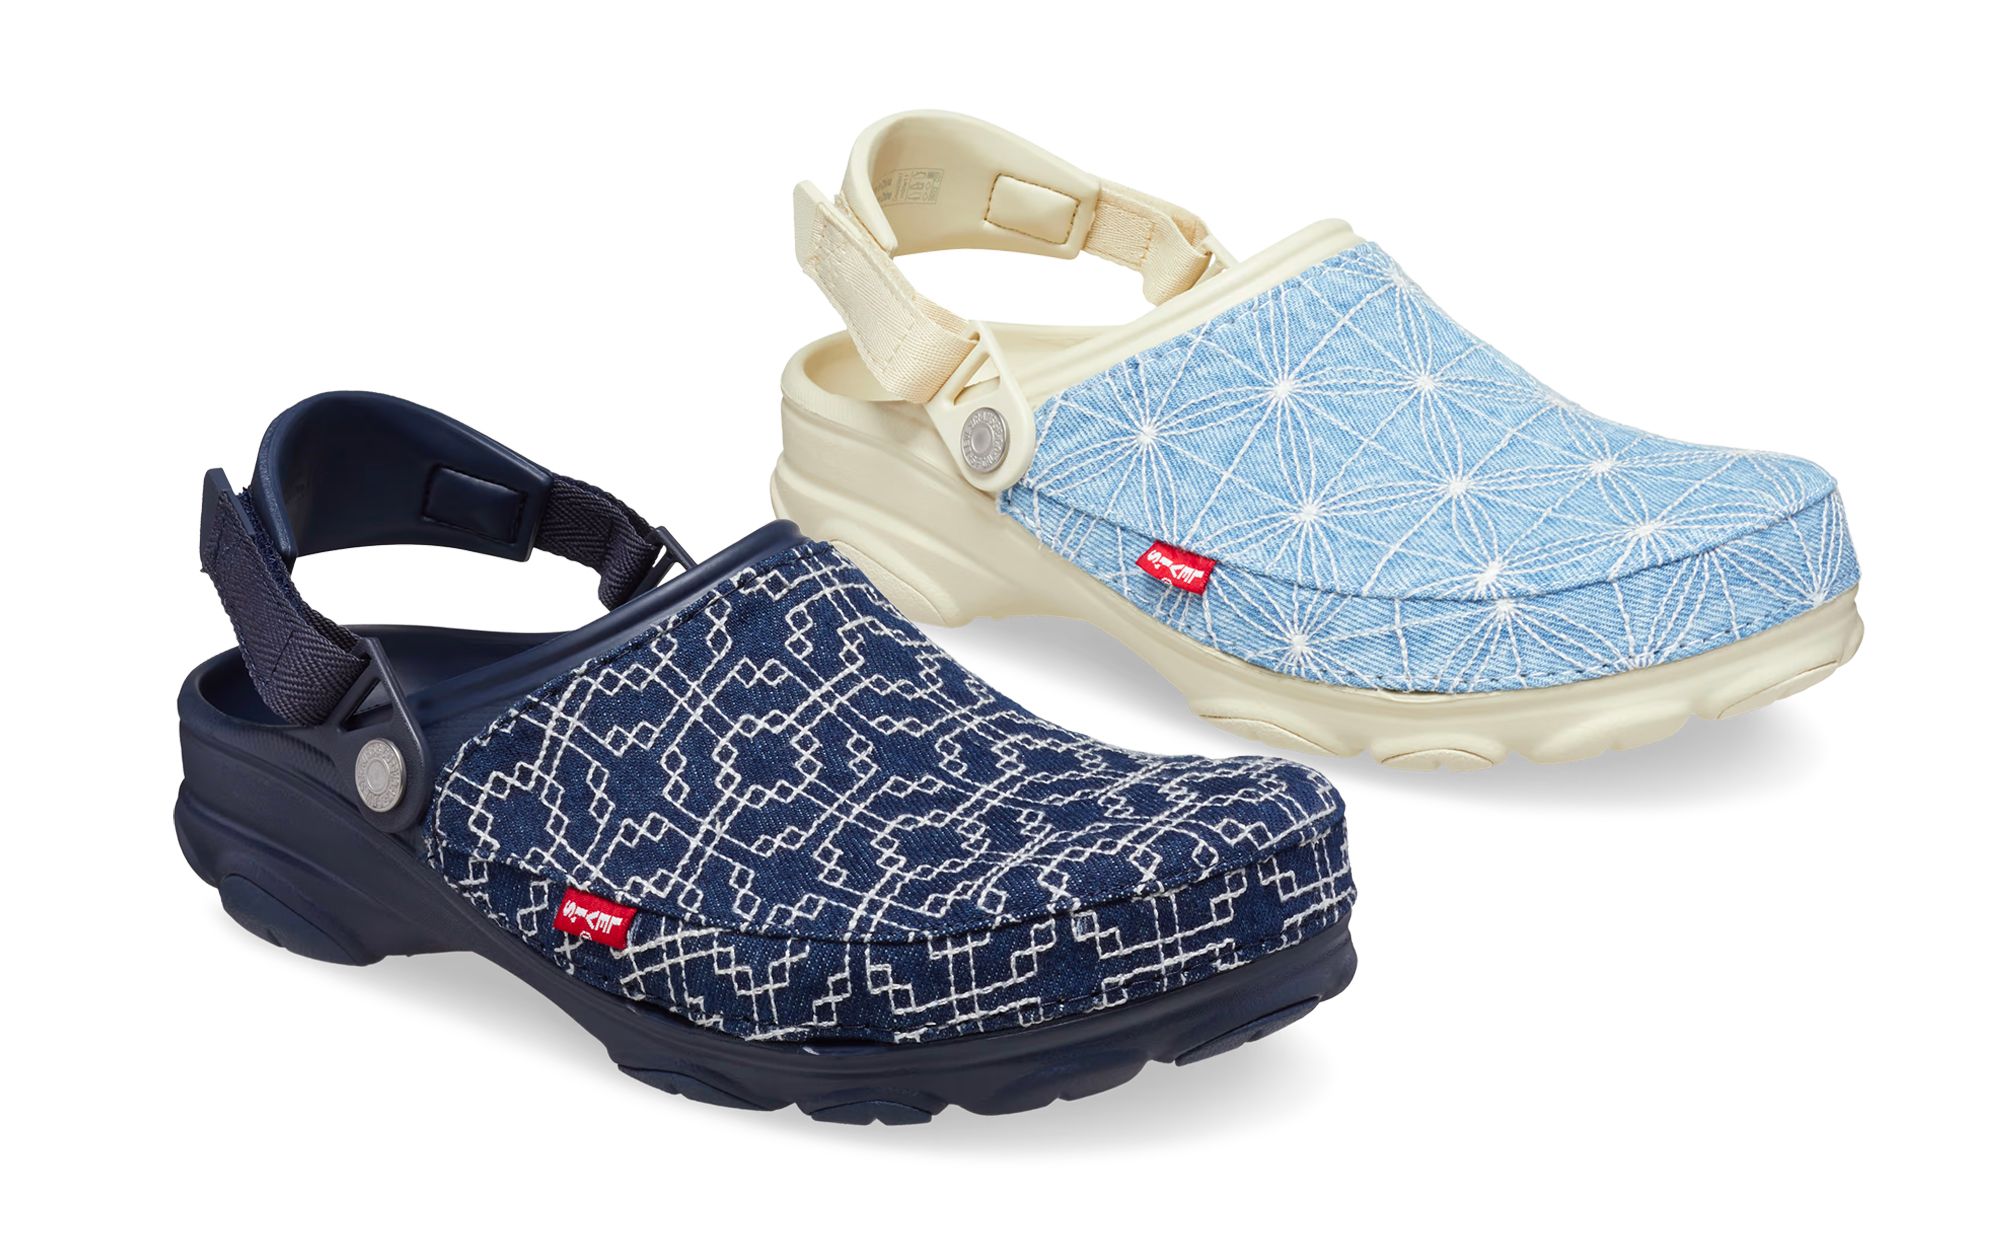 The Levi's x Crocs All-Terrain Clog Collection Releases September